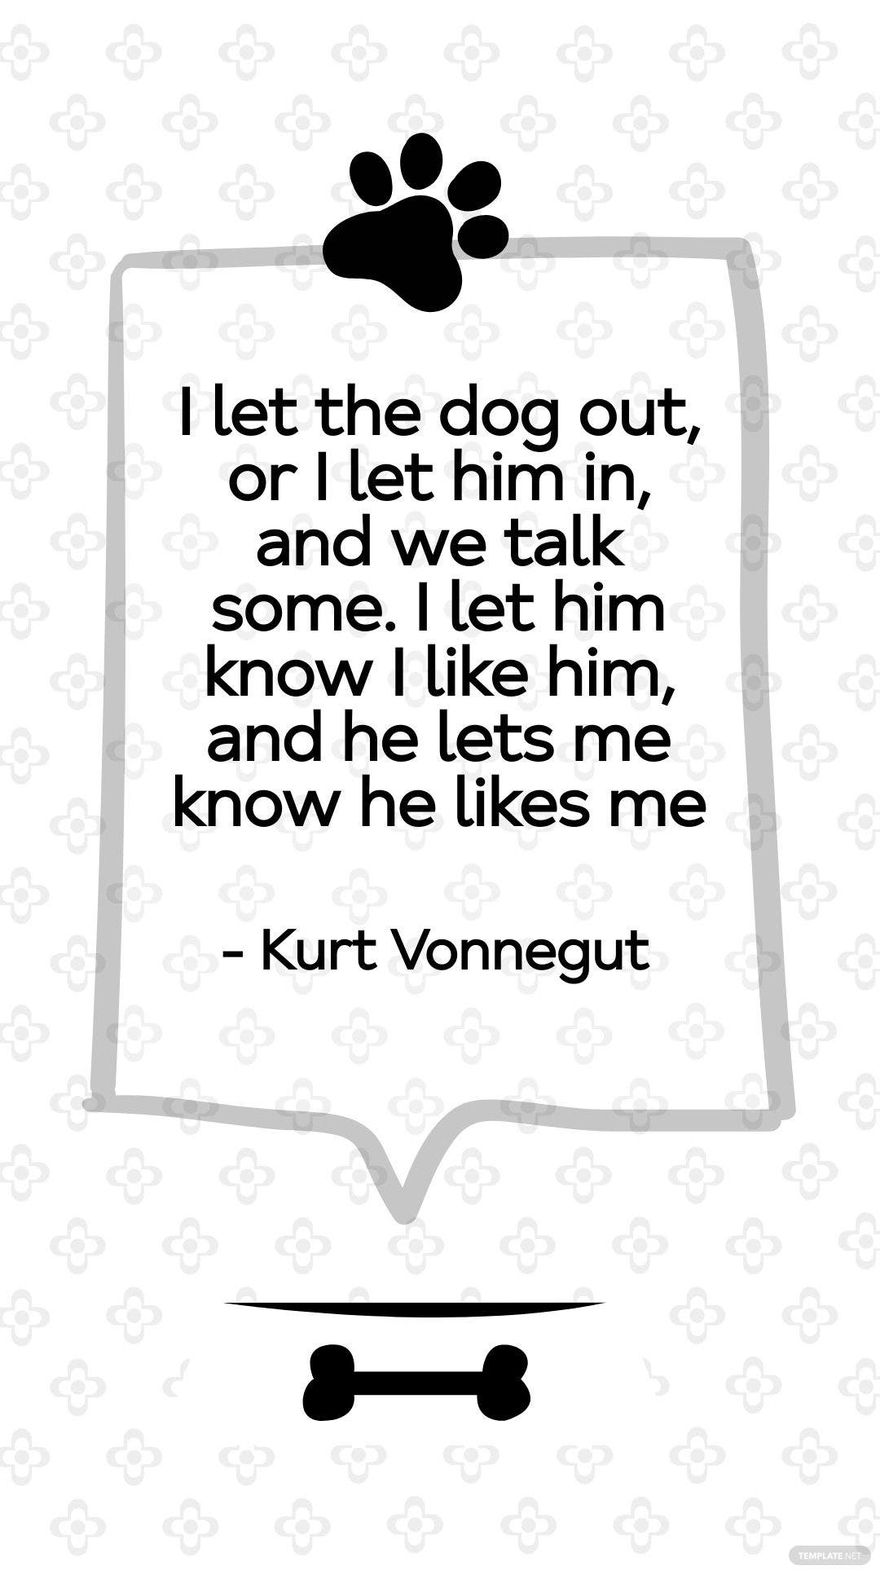 Kurt Vonnegut - I let the dog out, or I let him in, and we talk some. I let him know I like him, and he lets me know he likes me